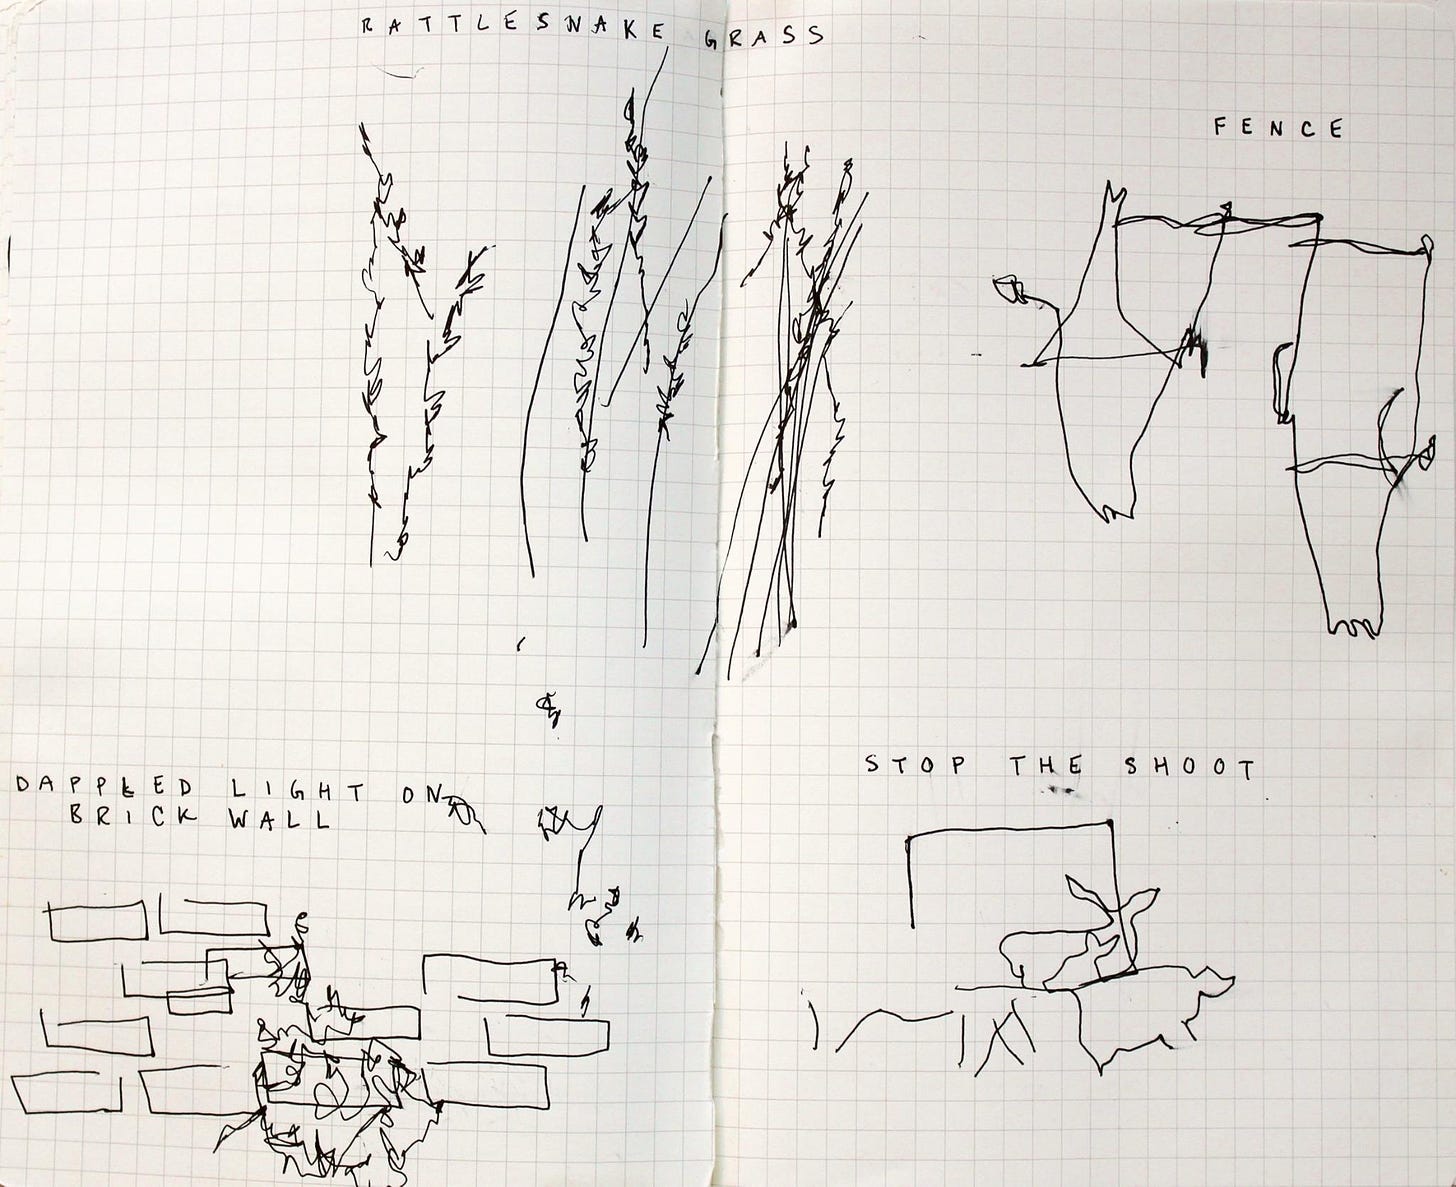 two-page spread from a sketchbook featuring sketches of grass, a brick wall, a poster and a fence